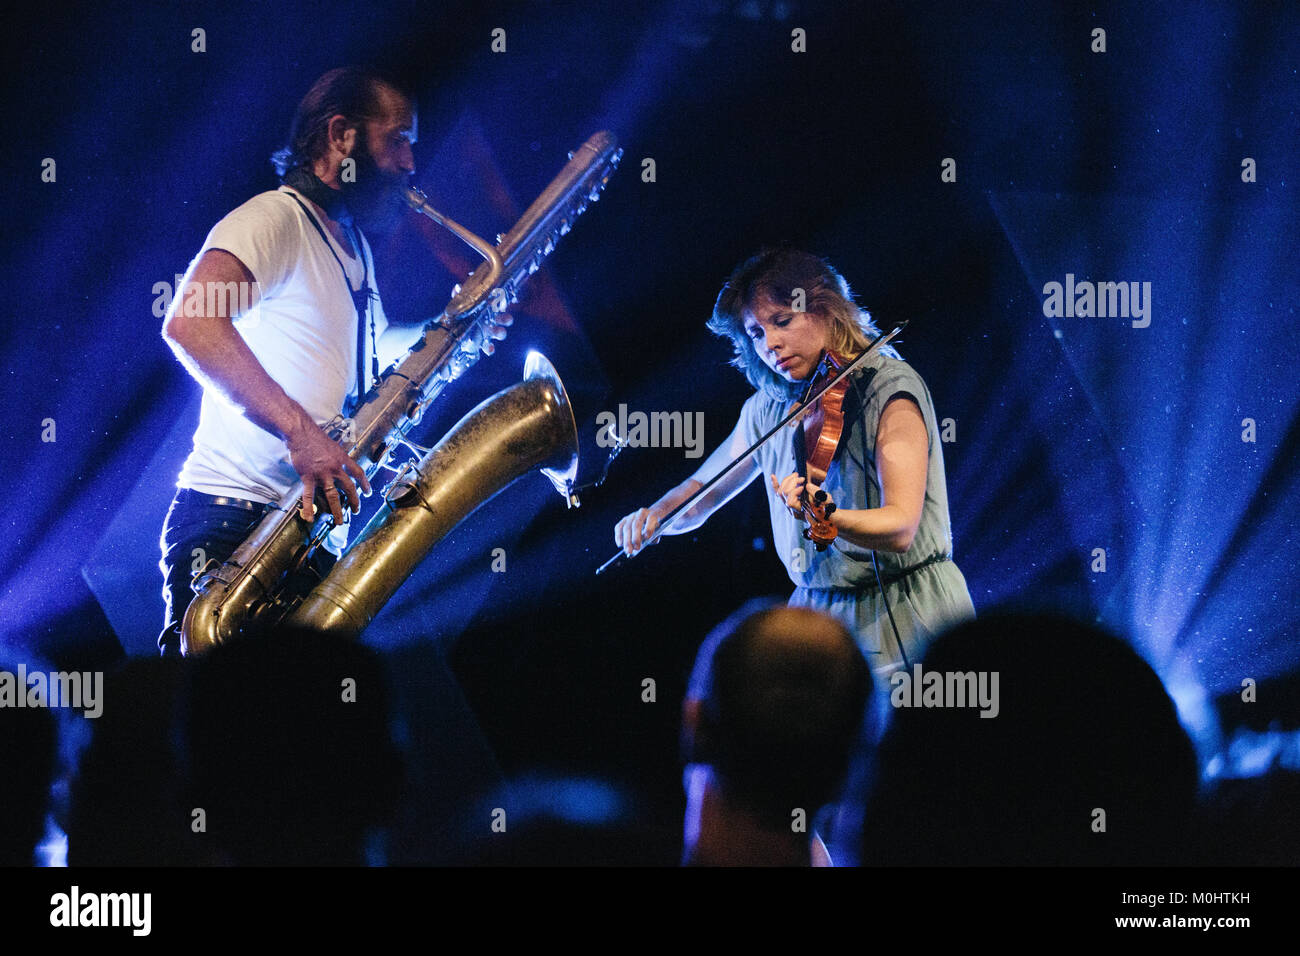 Colin stetson and sarah neufeld hi-res stock photography and images - Alamy